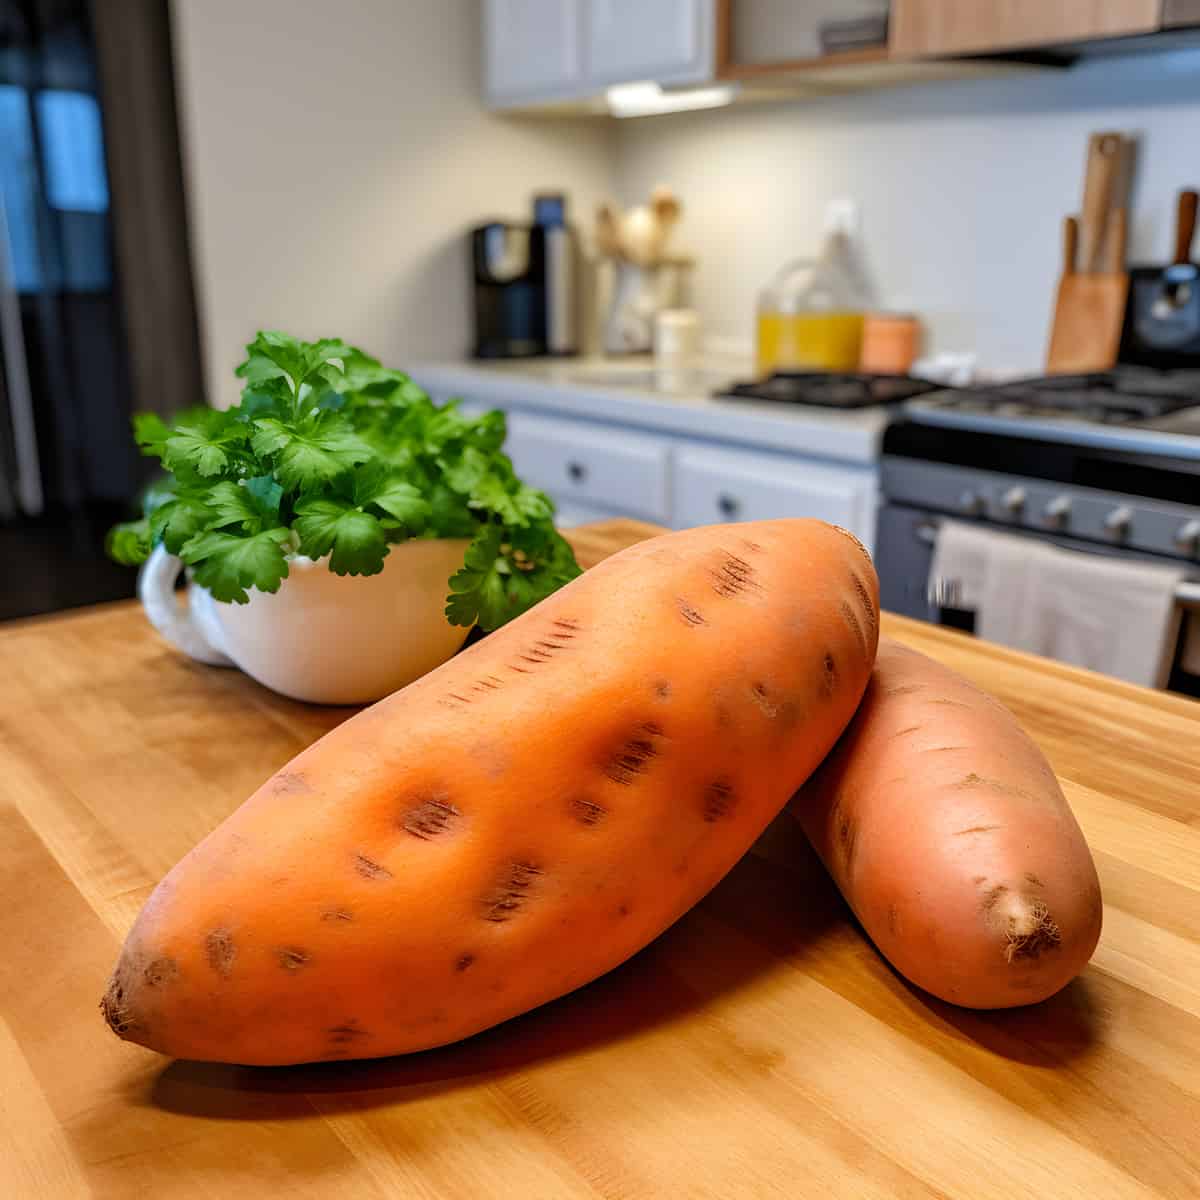 Uplsp Sweet Potatoes on a kitchen counter